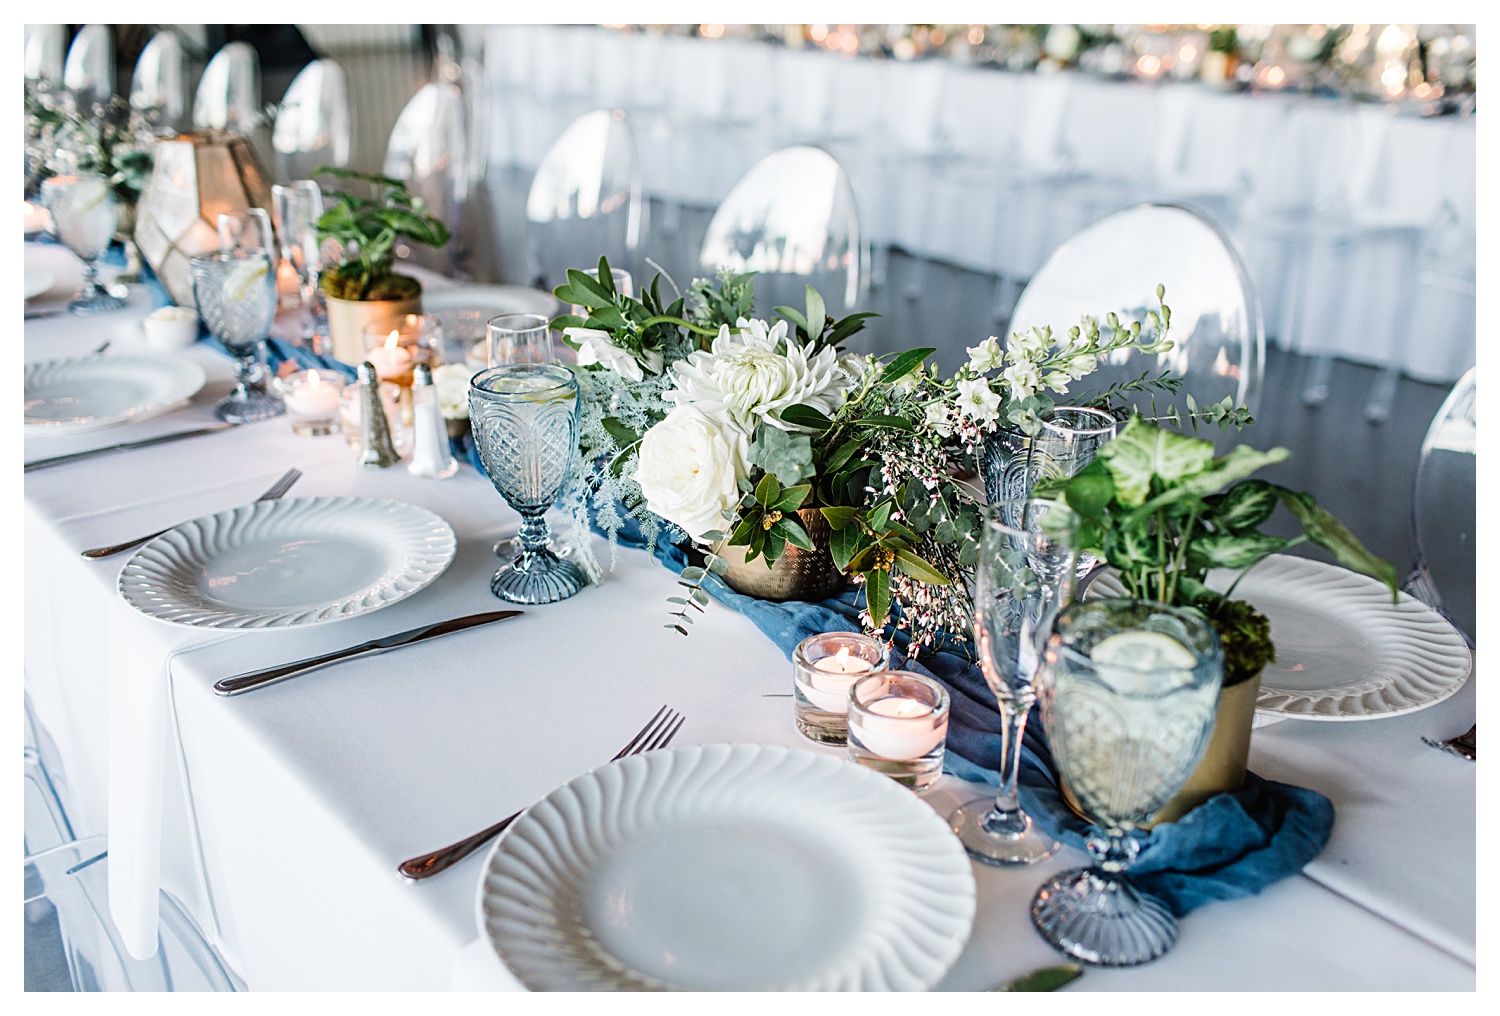 wedding table setting with greenery and blue accents